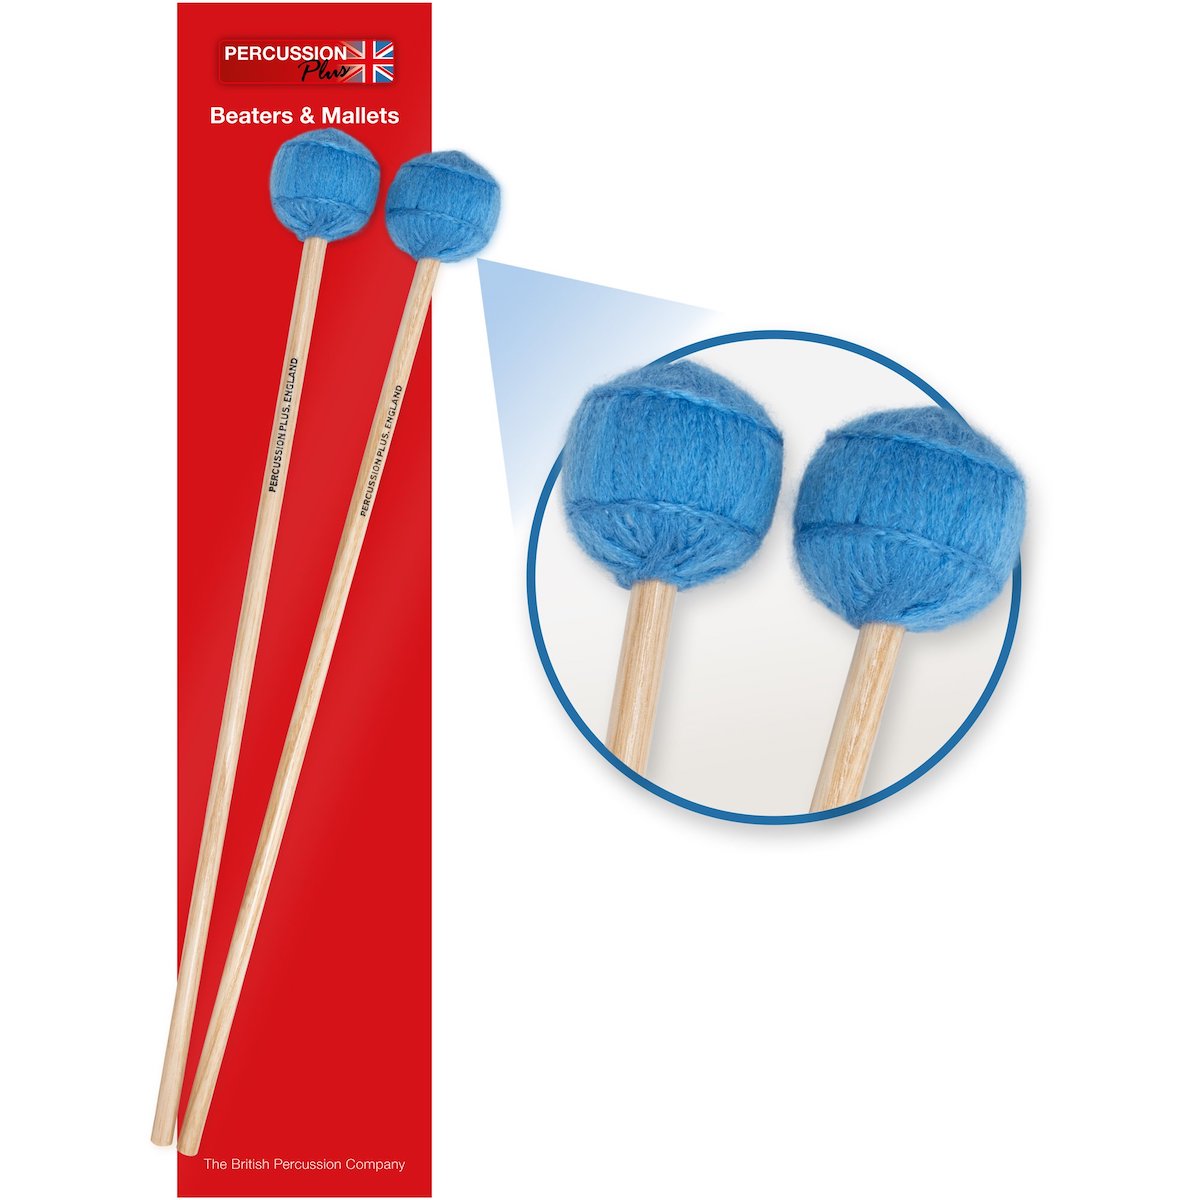 Percussion Plus Pair of Mallets - Soft